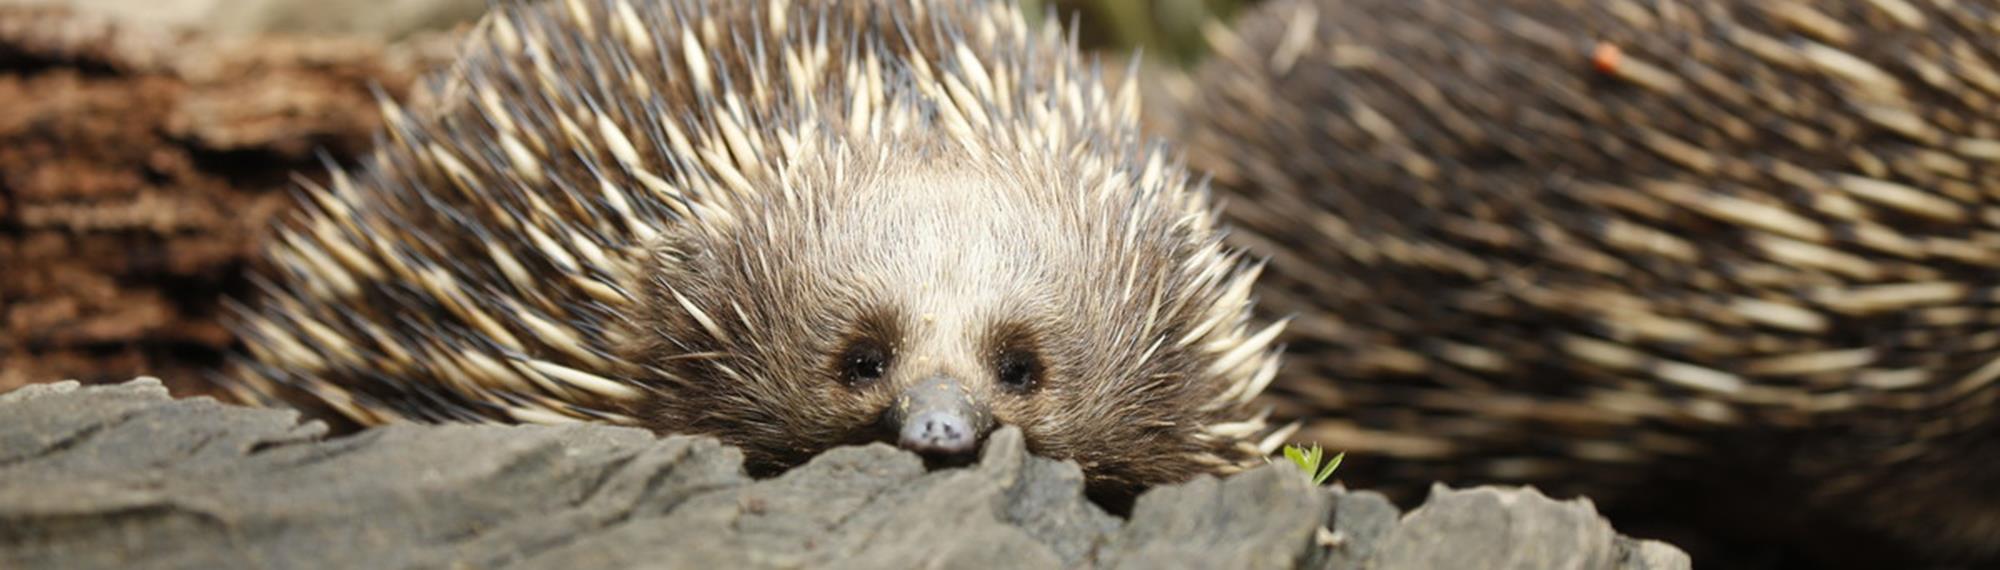 An echidna lying on the ground, peaking over a log, looking towards the camera. It has perched its nose on a log.